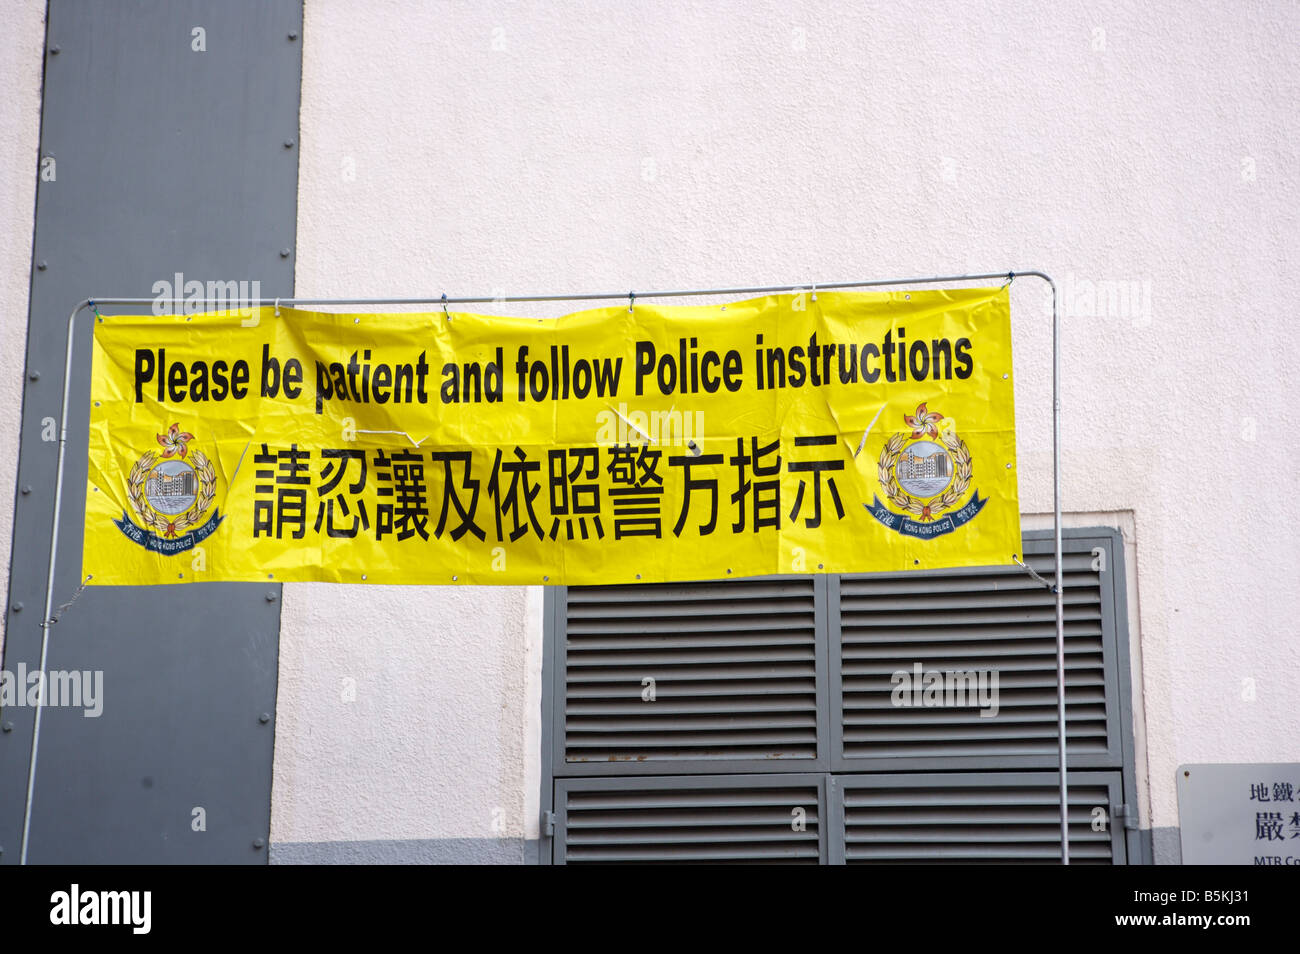 Please be patient and follow Police instruction A sign in Hong Kong put up to control public order during New Year celebrations Stock Photo